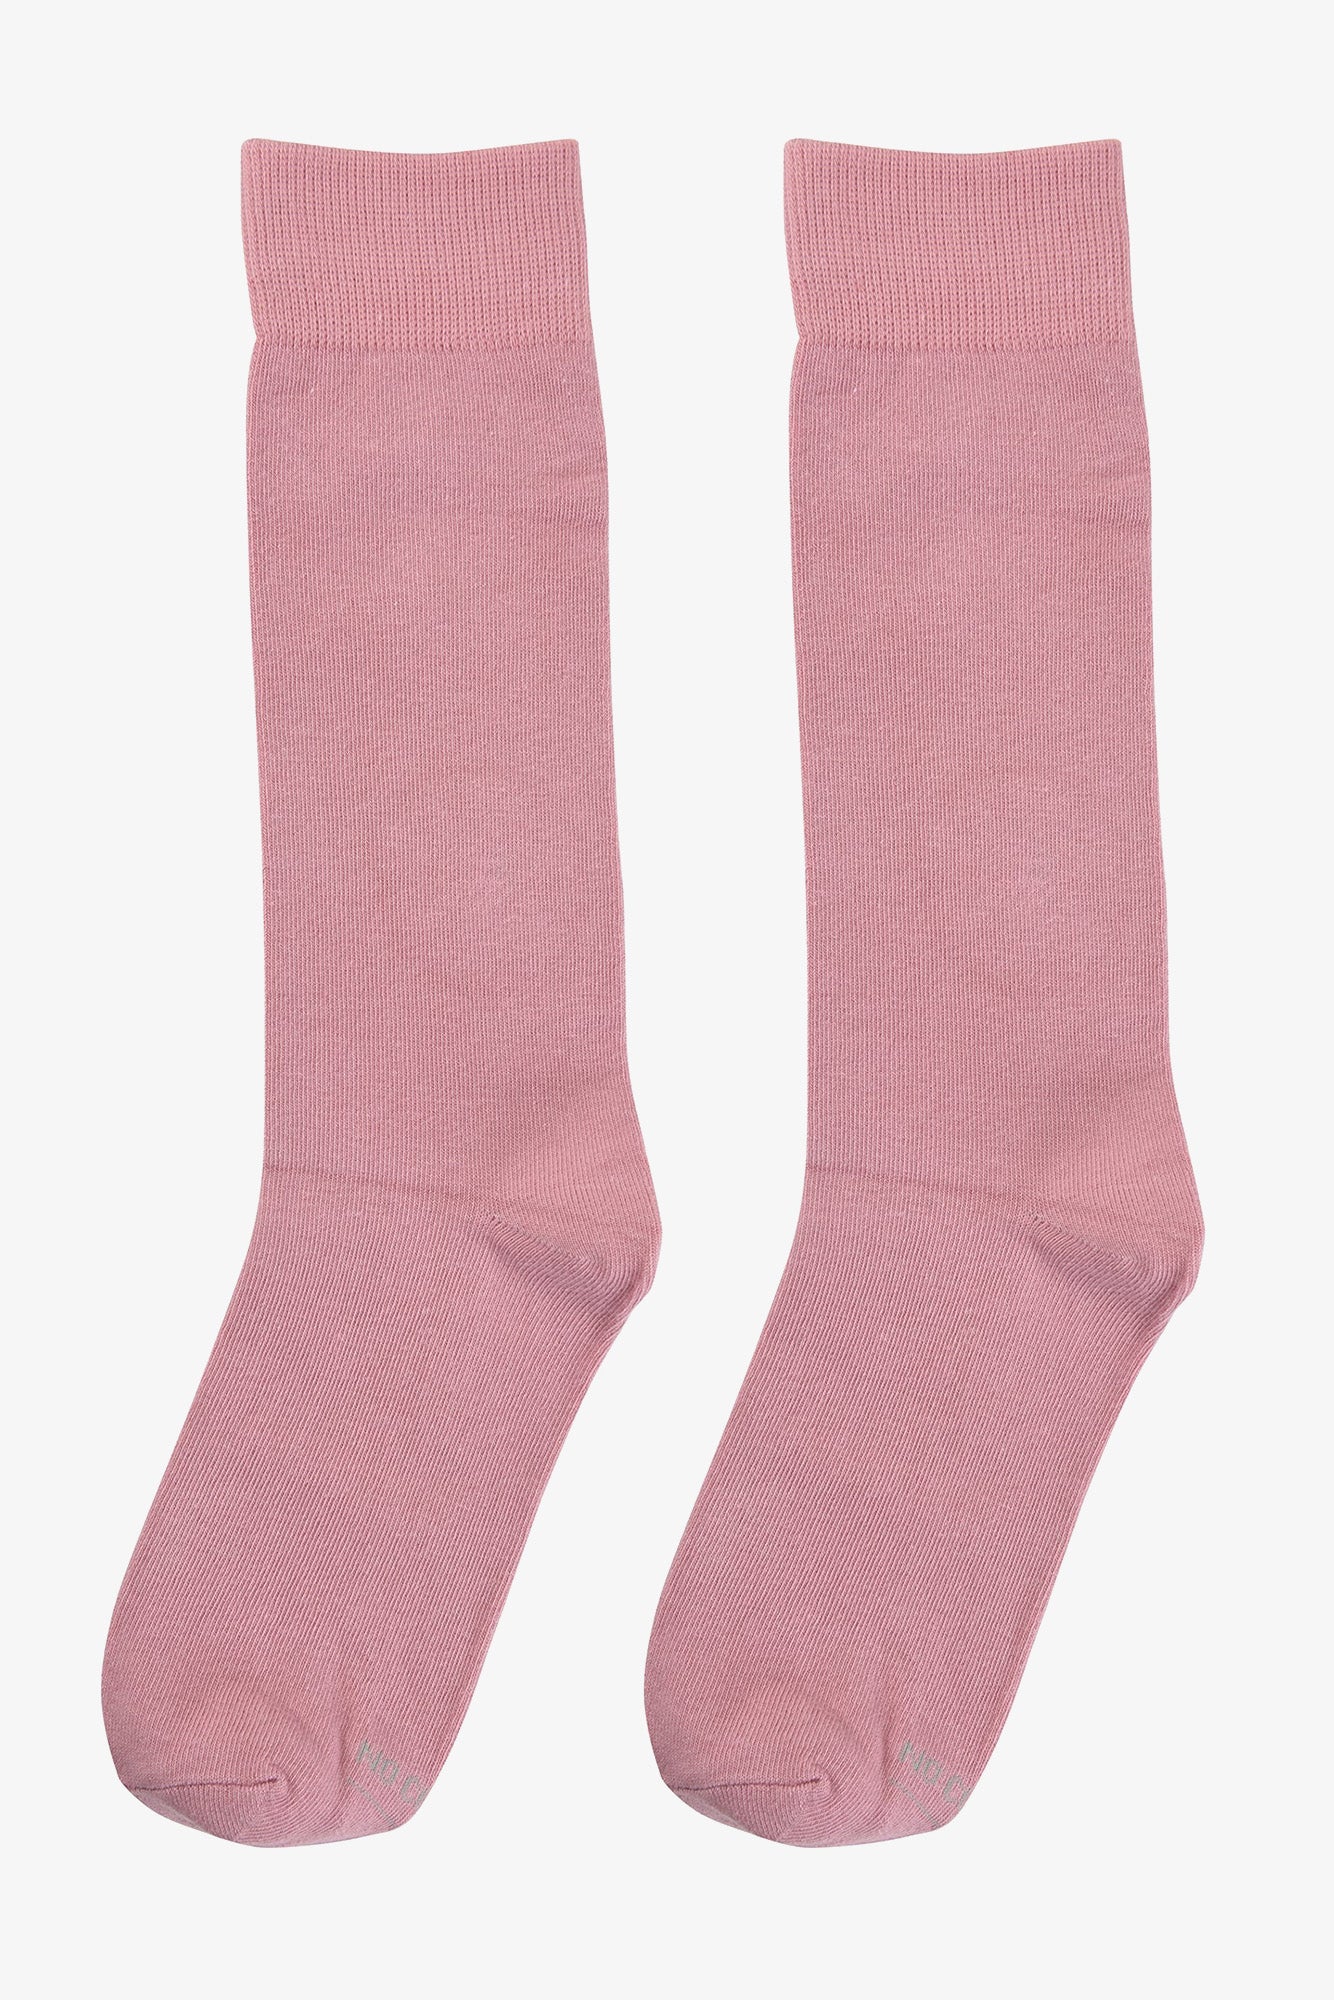 Solid Groomsmen Socks By No Cold Feet - Pink